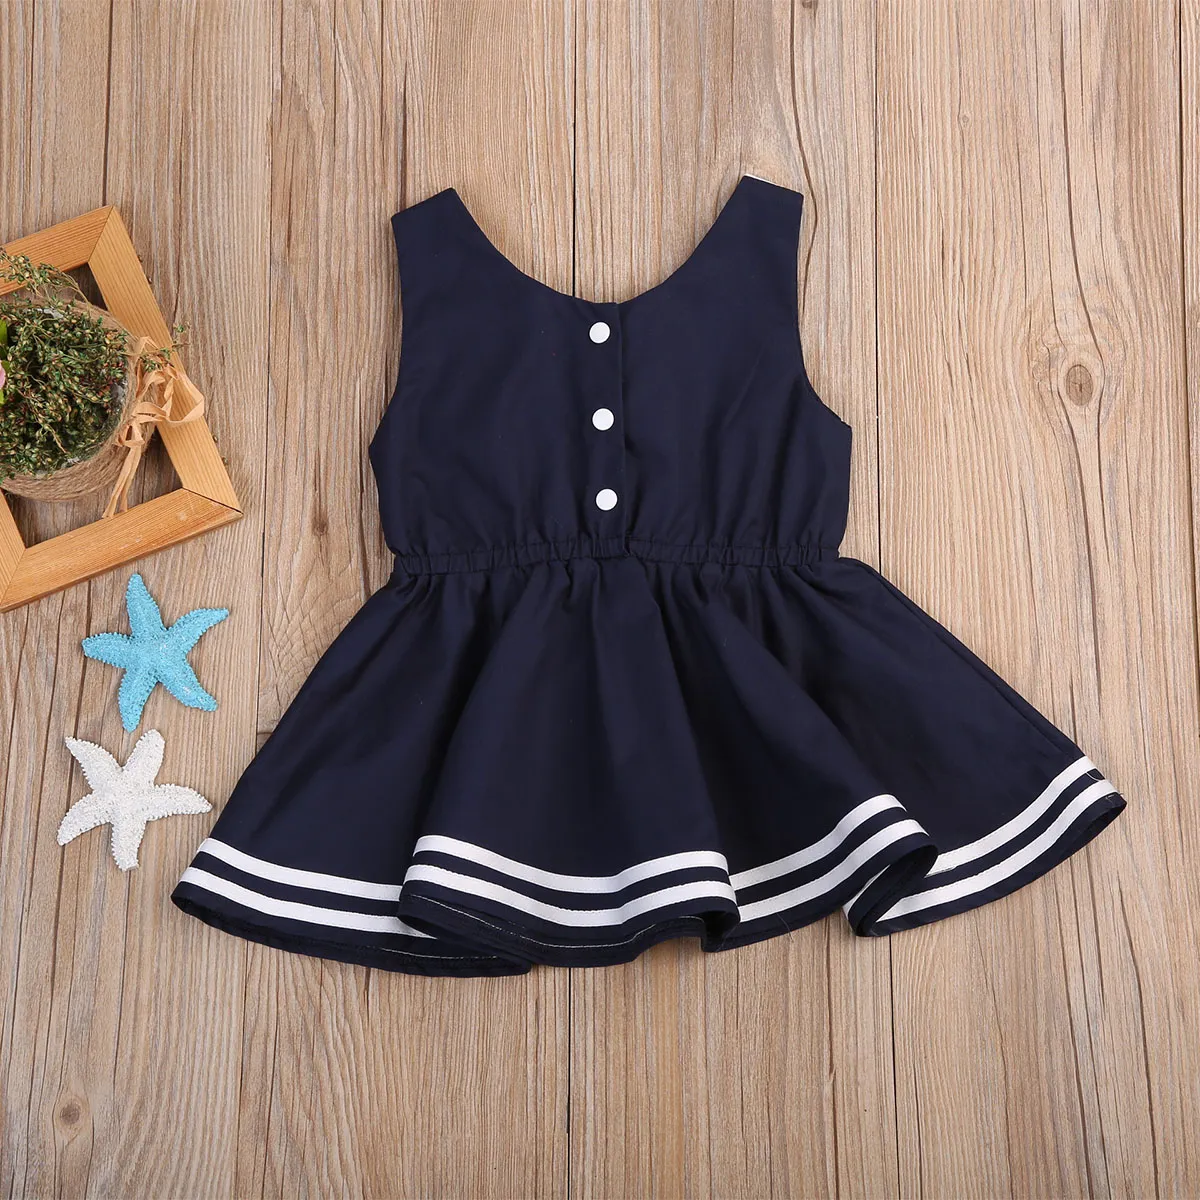 Kid Girl Navy Dress Sailor Collar Baby Kids Clothing Striped Brief Dresses Boutique Clothes Girls Beach Costumes Sundress Preppy S7006394